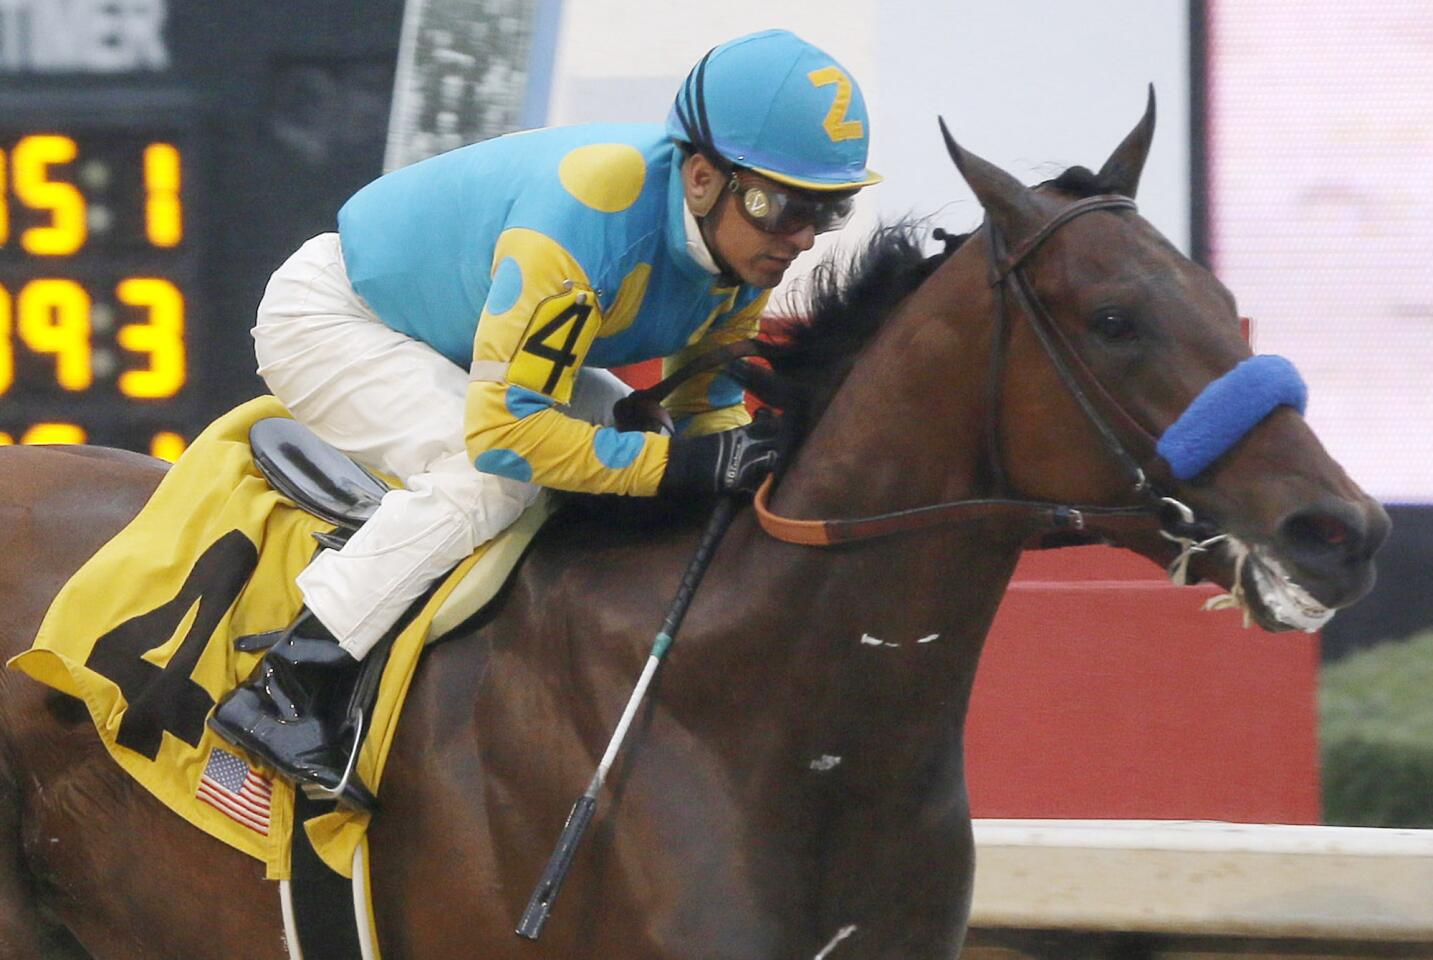 American Pharoah (Bob Baffert, trainer; Victor Espinoza, jockey). The horse had a breathtaking performance to win the Arkansas Derby by eight lengths. He had two overpowering wins at 3 after a 2-year-old championship season followed by an injury. He has won four in a row after finishing fifth in his first career start. Next start: Kentucky Derby. Odds: 5-1.